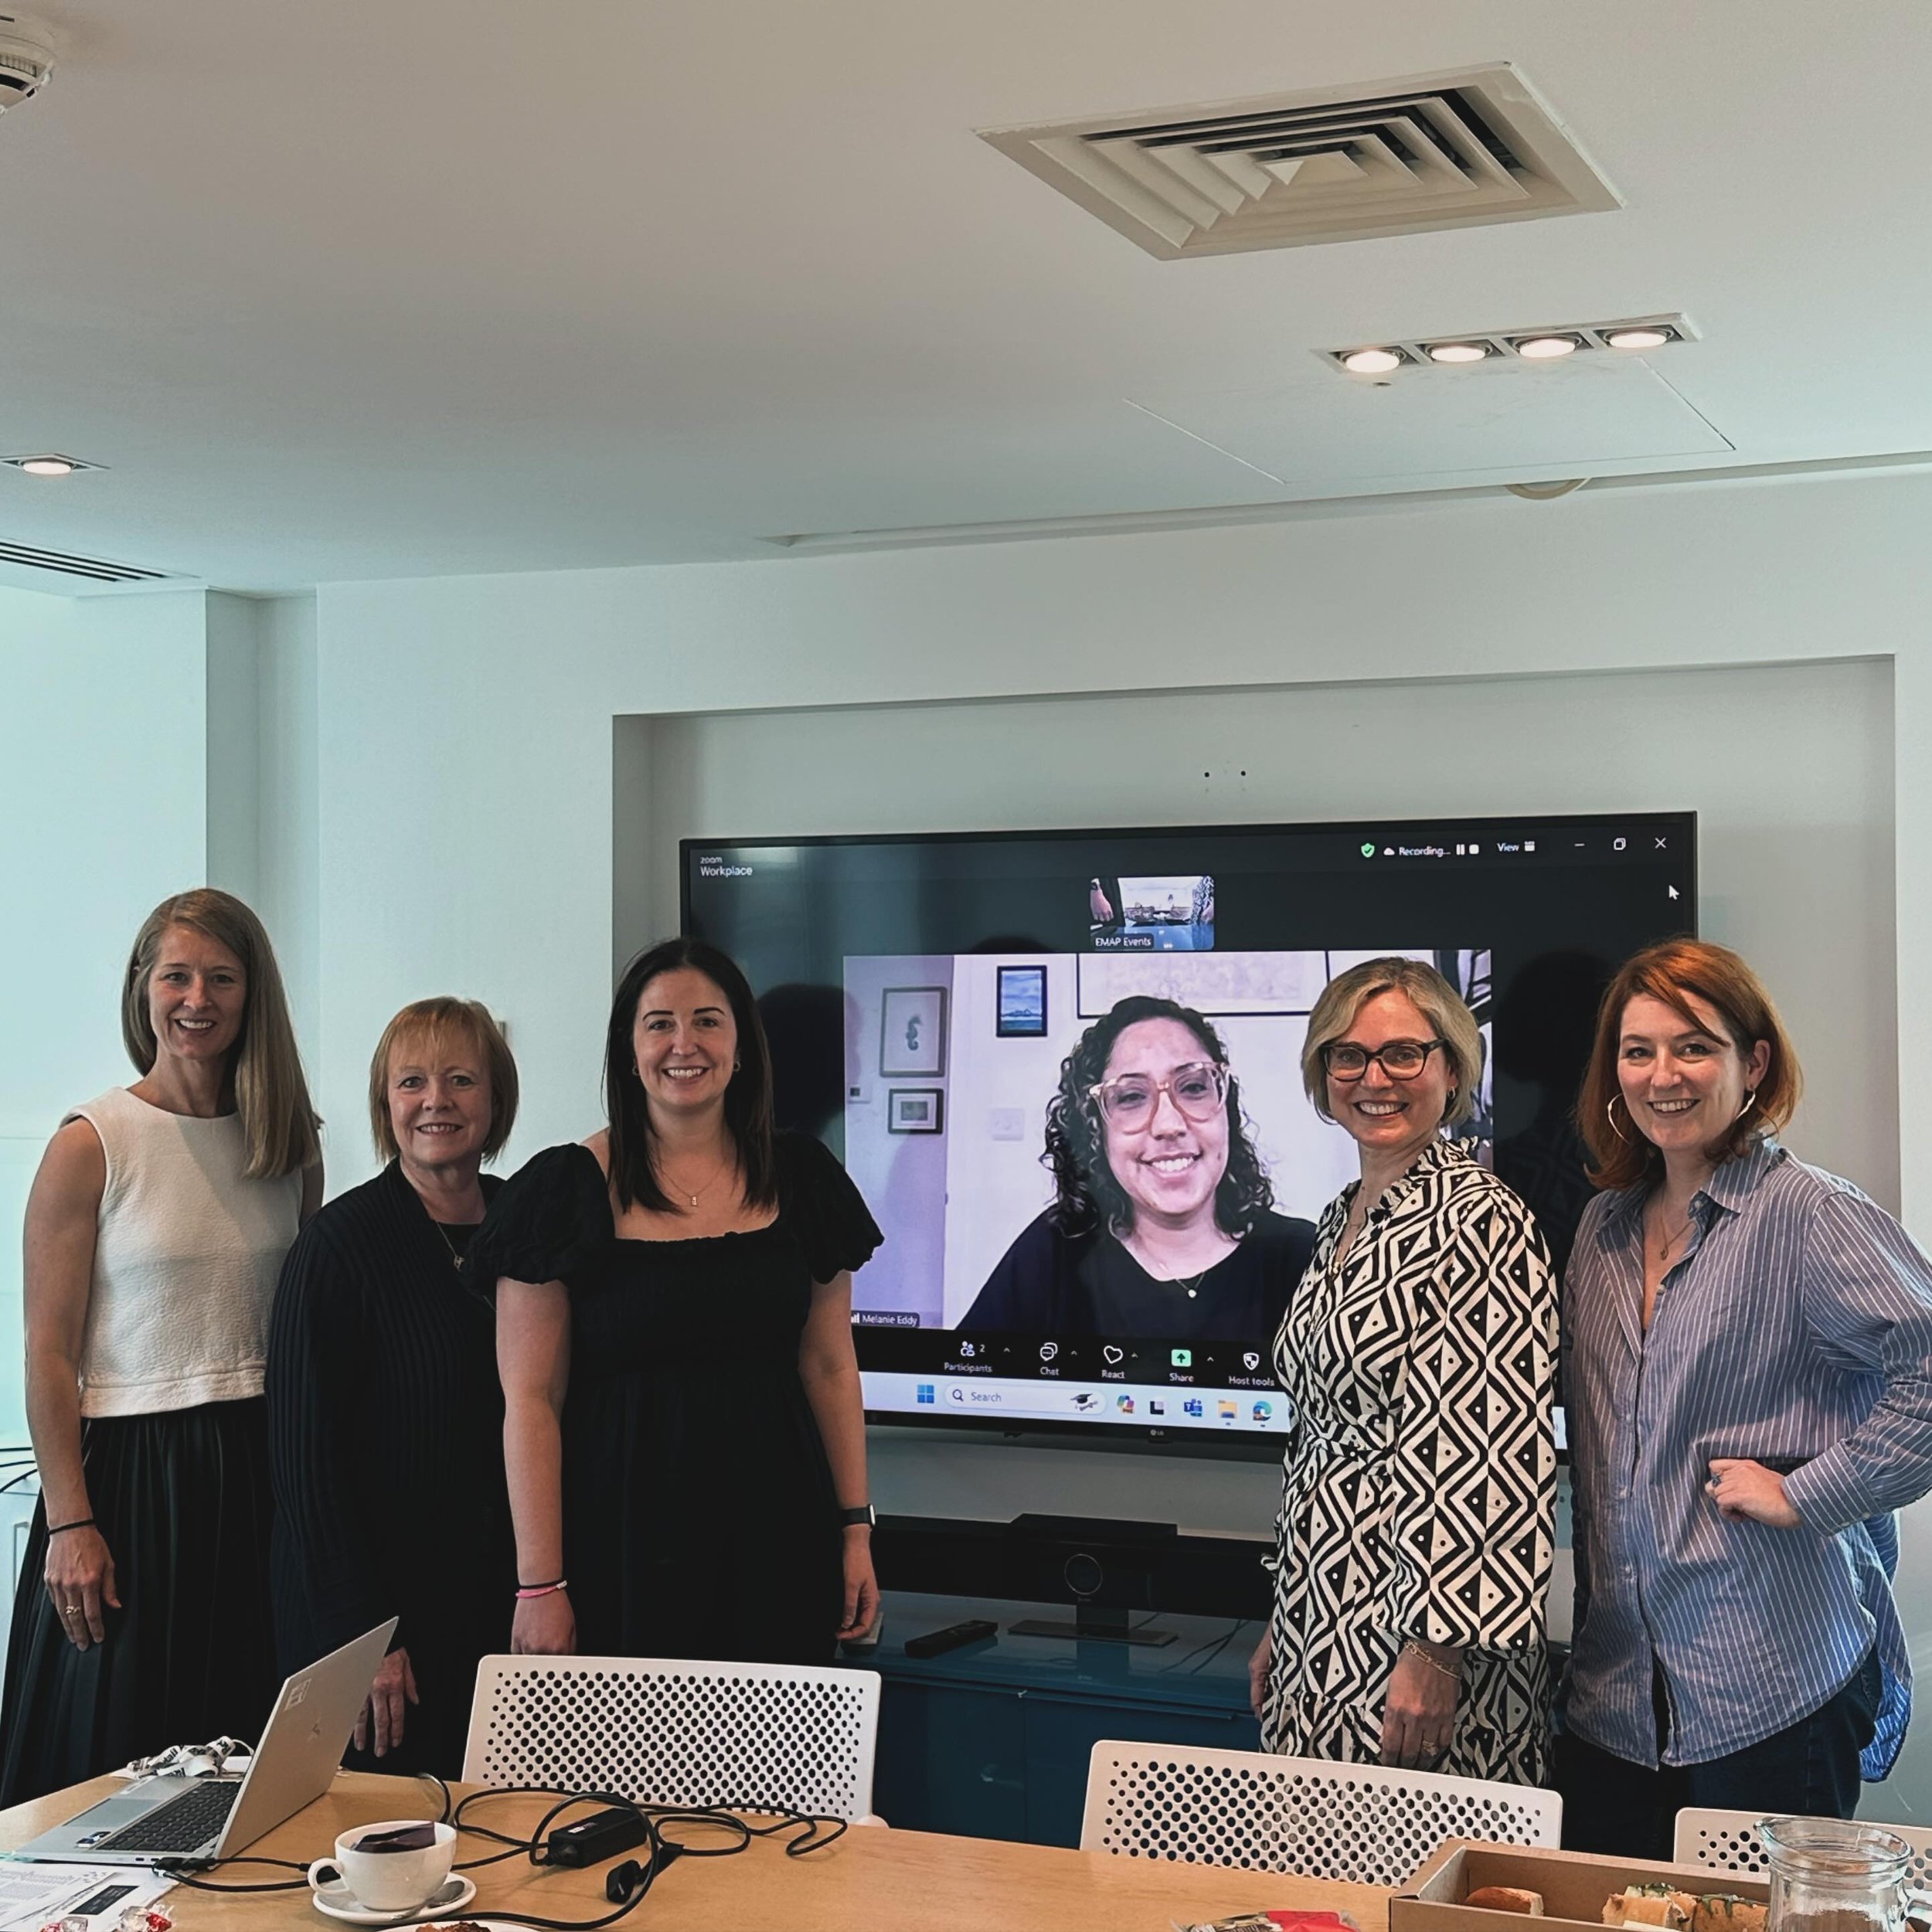 An intense day of judging for the UK Jewellery Awards 2024 💫 

For anyone who wonders how it works, we review all of the entry packs ahead of time. We then interview everyone on the shortlist over Zoom to ask any outstanding questions we have, and a